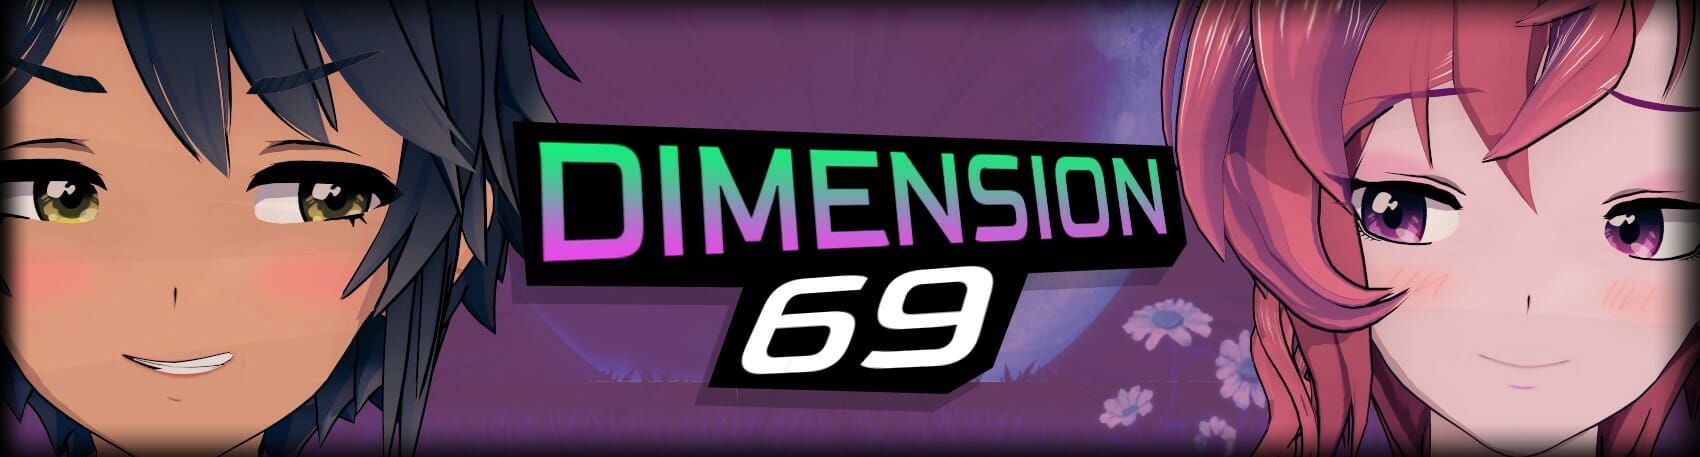 Dimension 69 Adult Game Android Download (12)